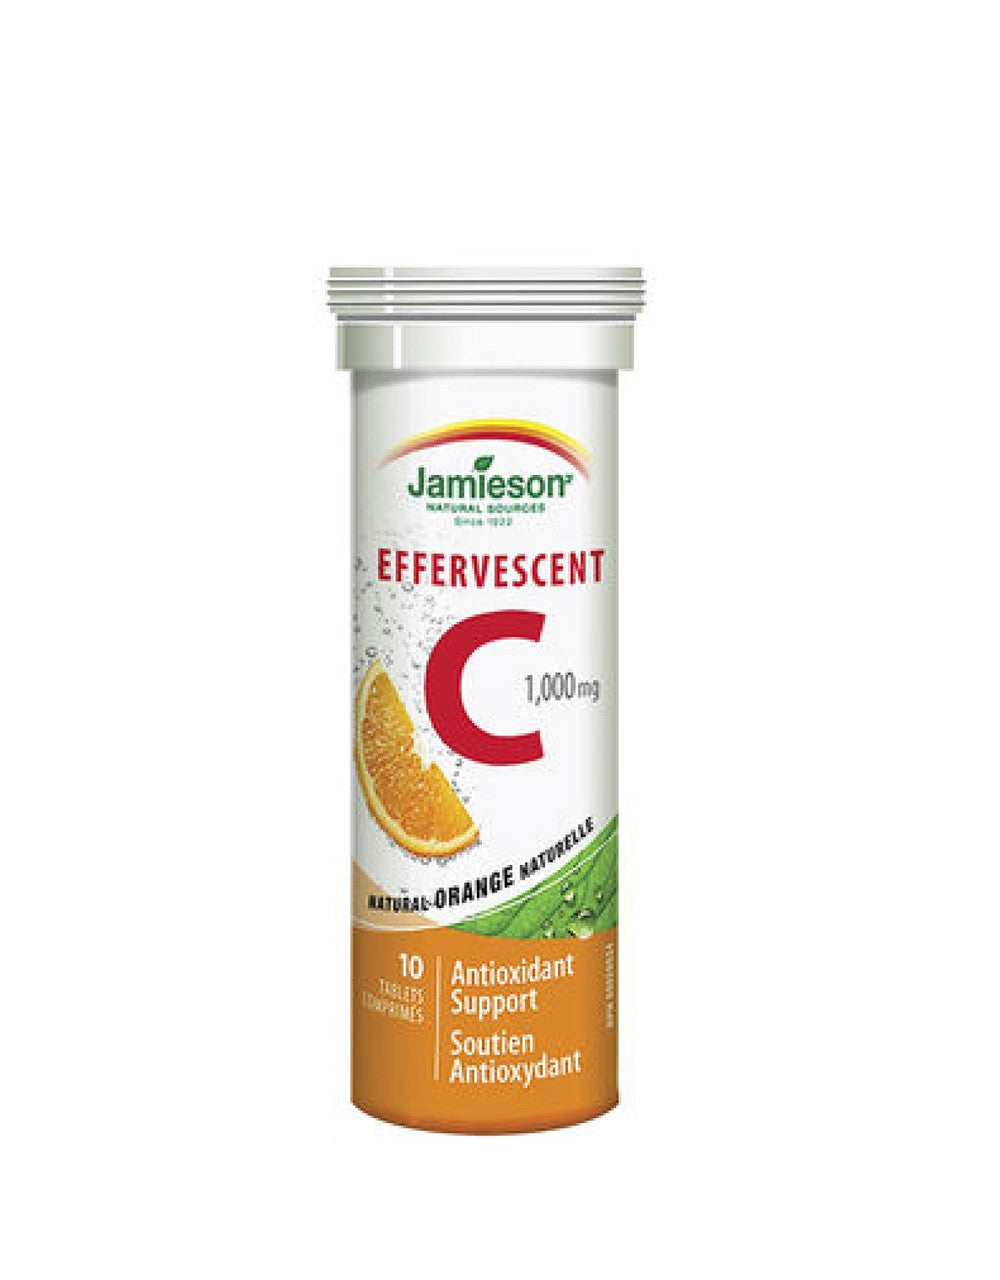 Jamieson Effervescent C, 1,000 MG - ORANGE, 10 tubes {Imported from Canada}